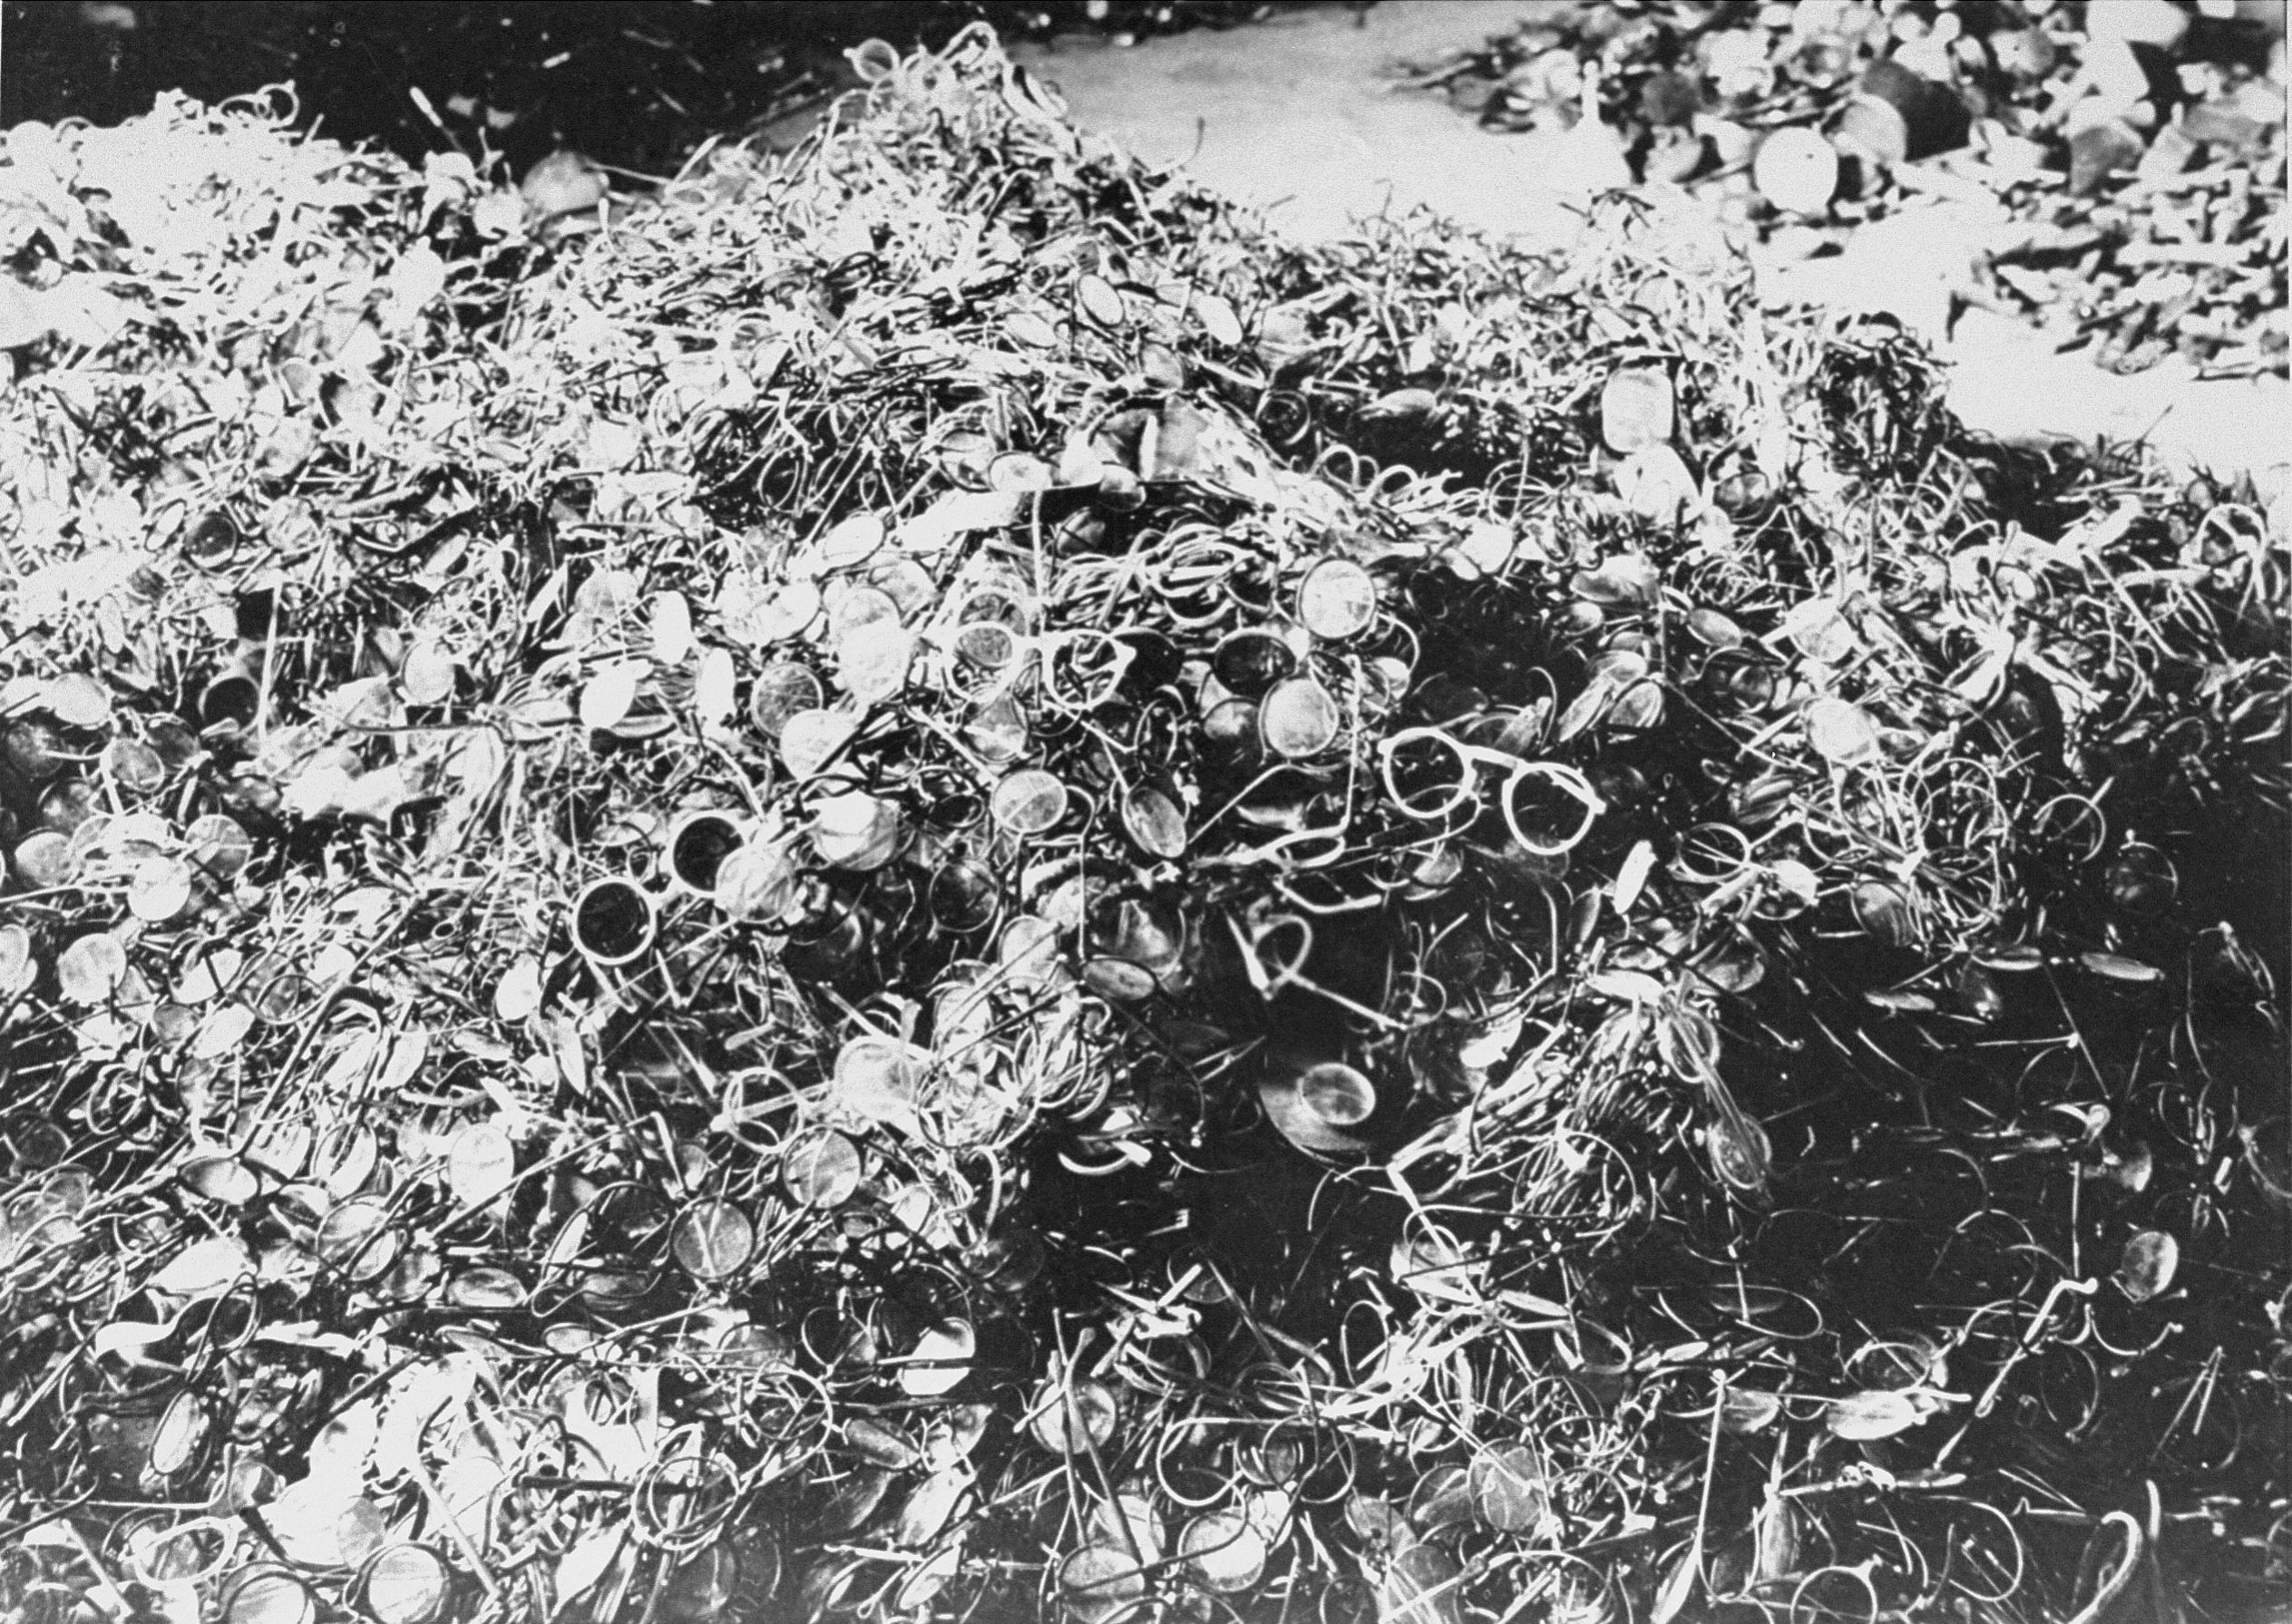 pile of glasses, Auschwitz, 1945